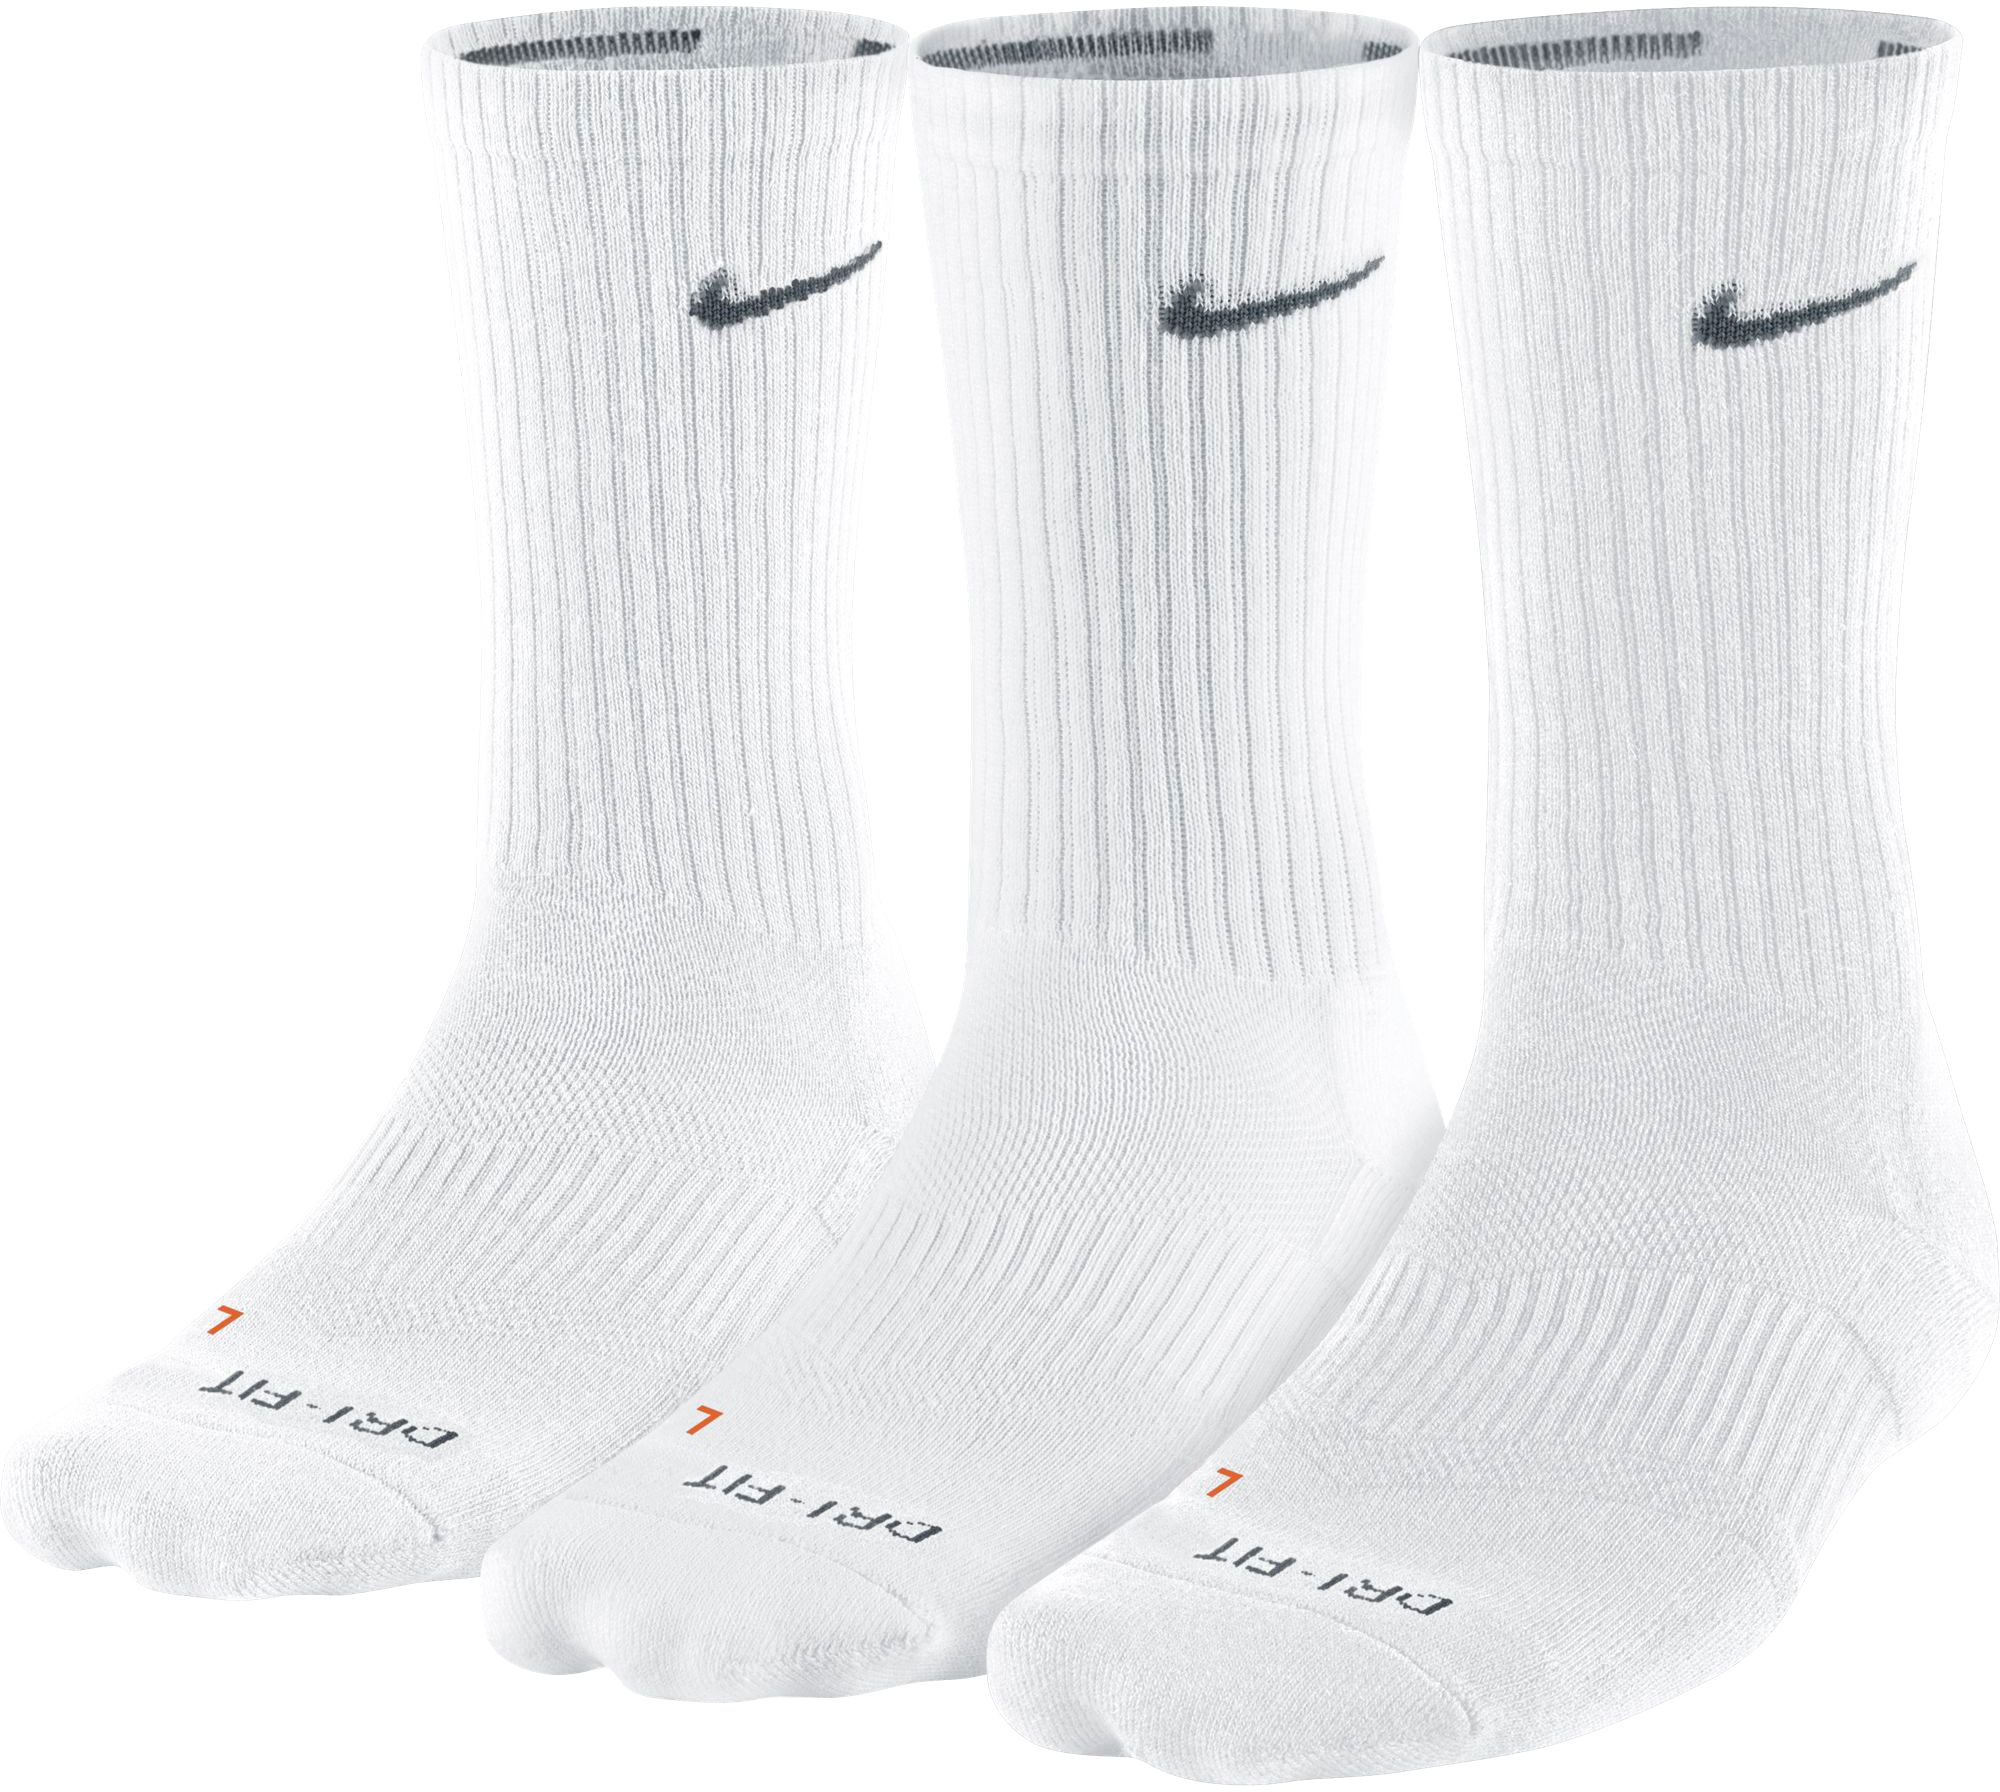 nike socks with left and right